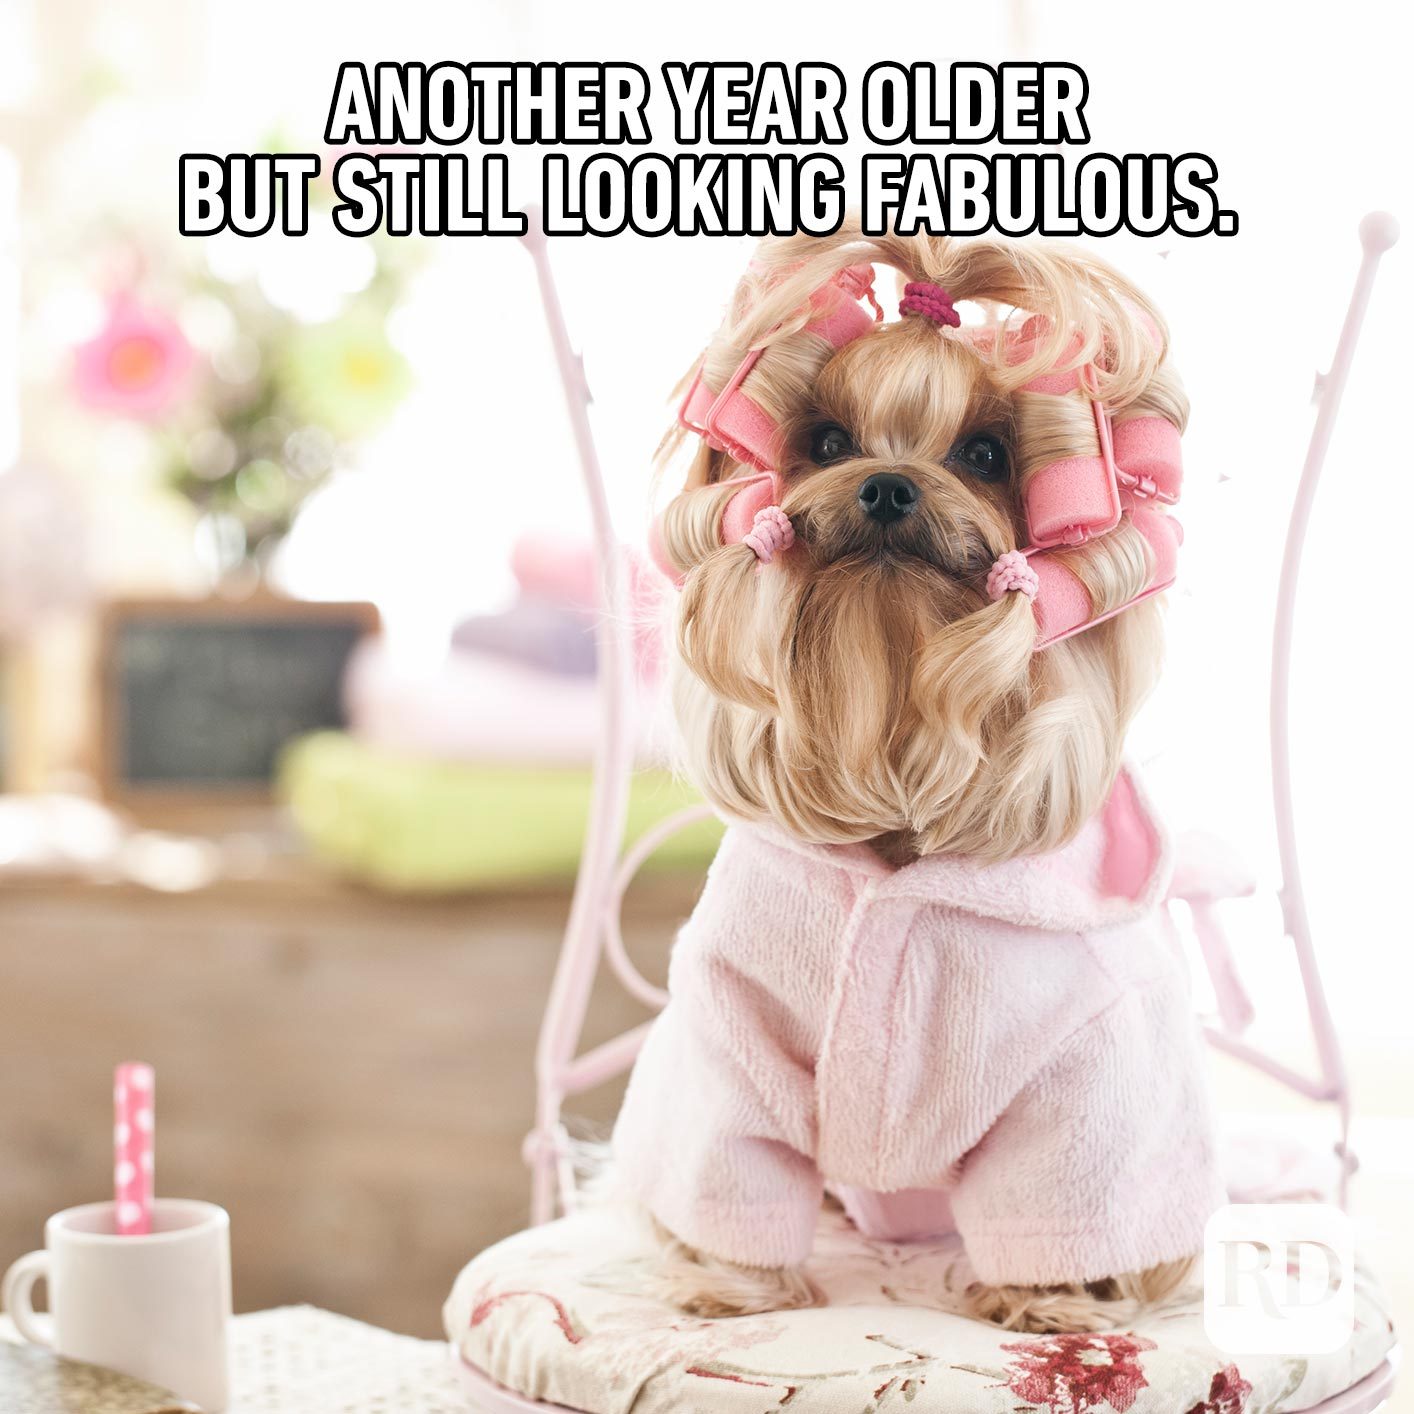 52 Funny Birthday Memes That Will Make Anyone Smile on Their Big Day